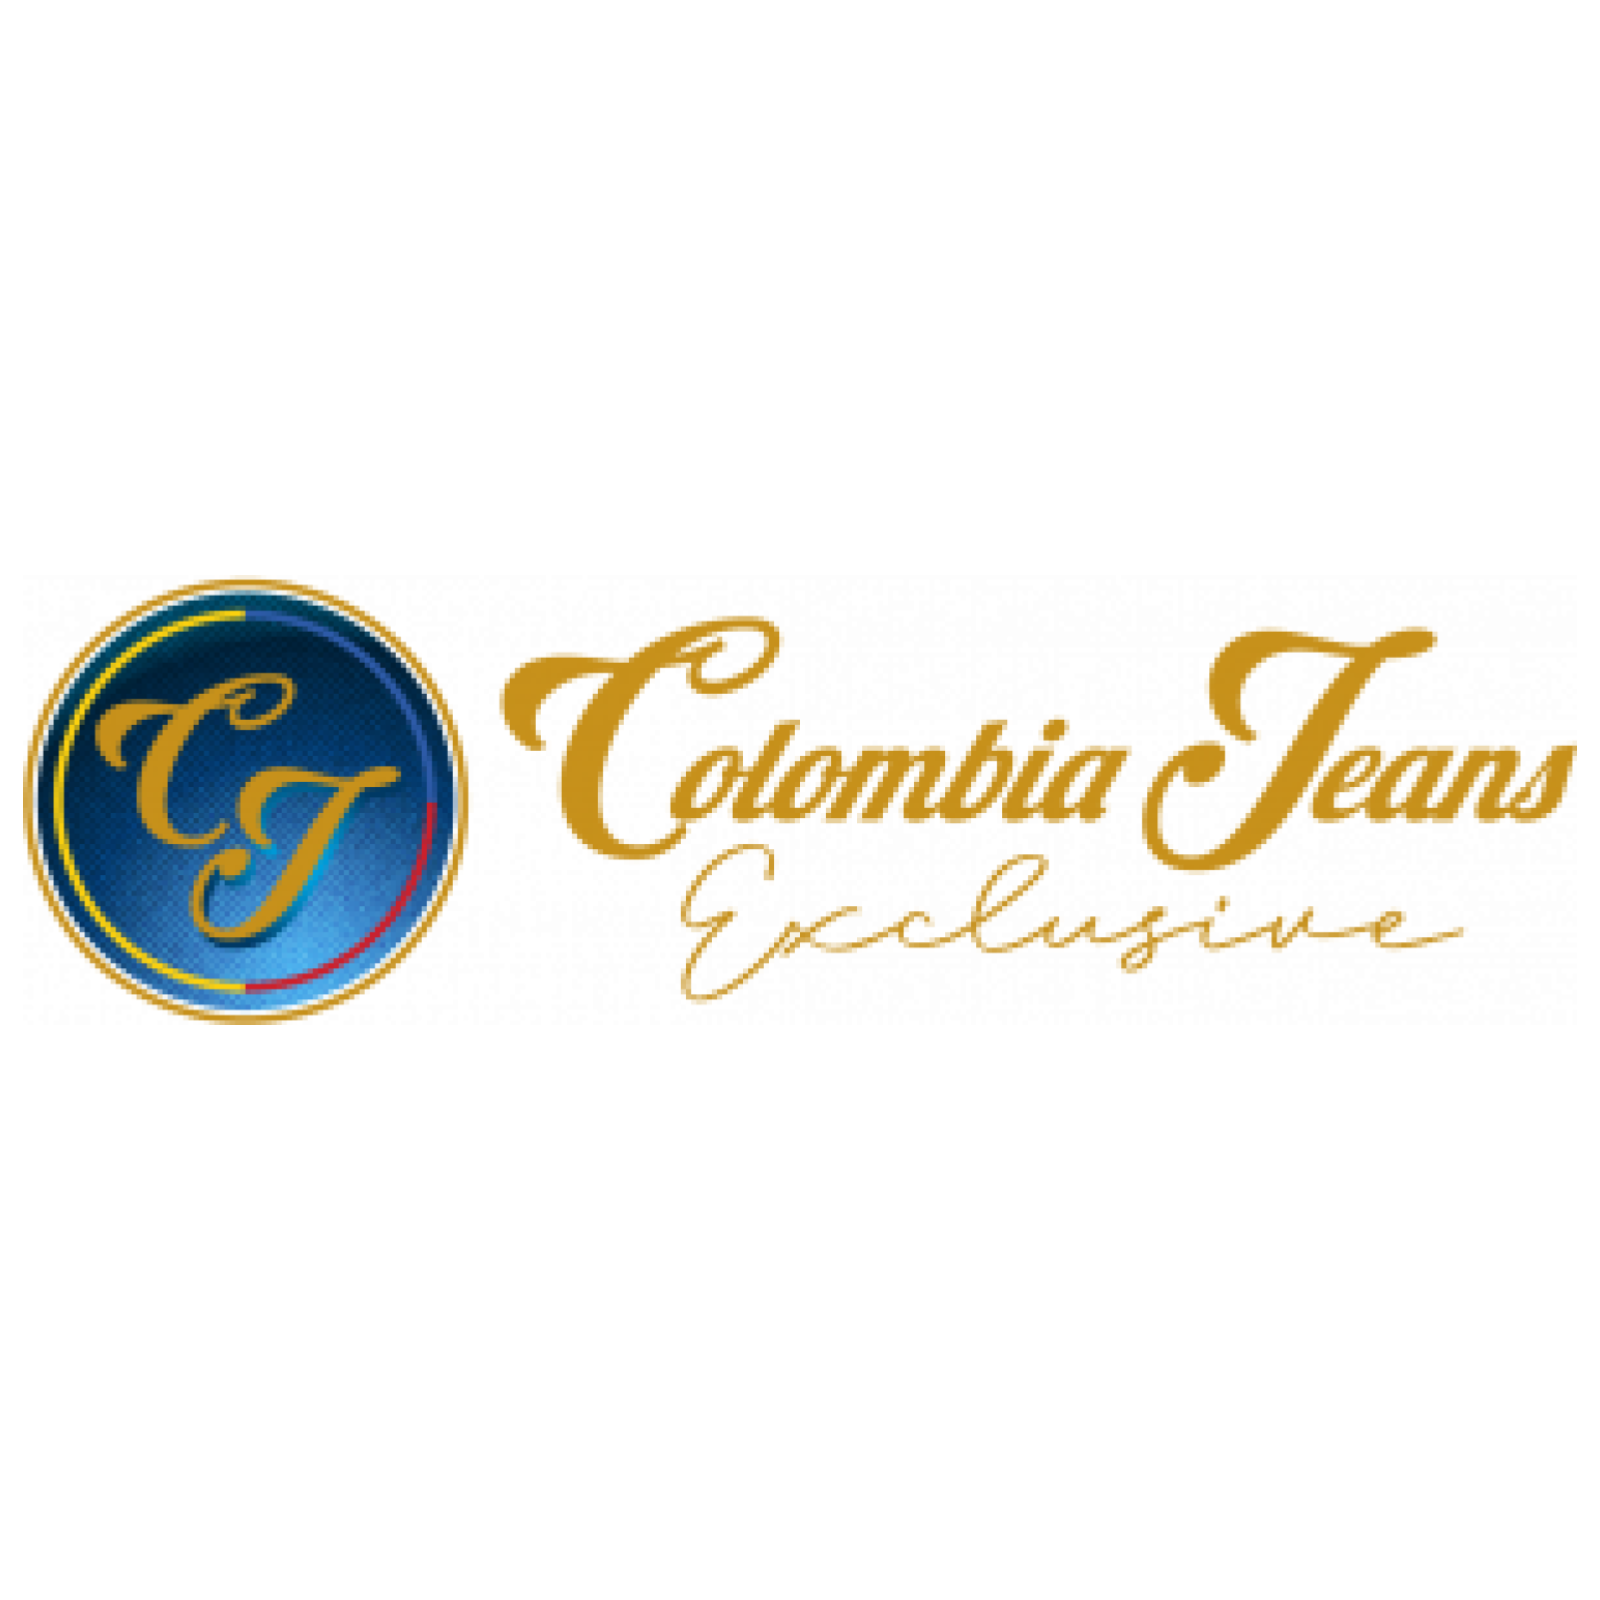 Colombianmode - Jeans colombianos, colombian jeans, jeans